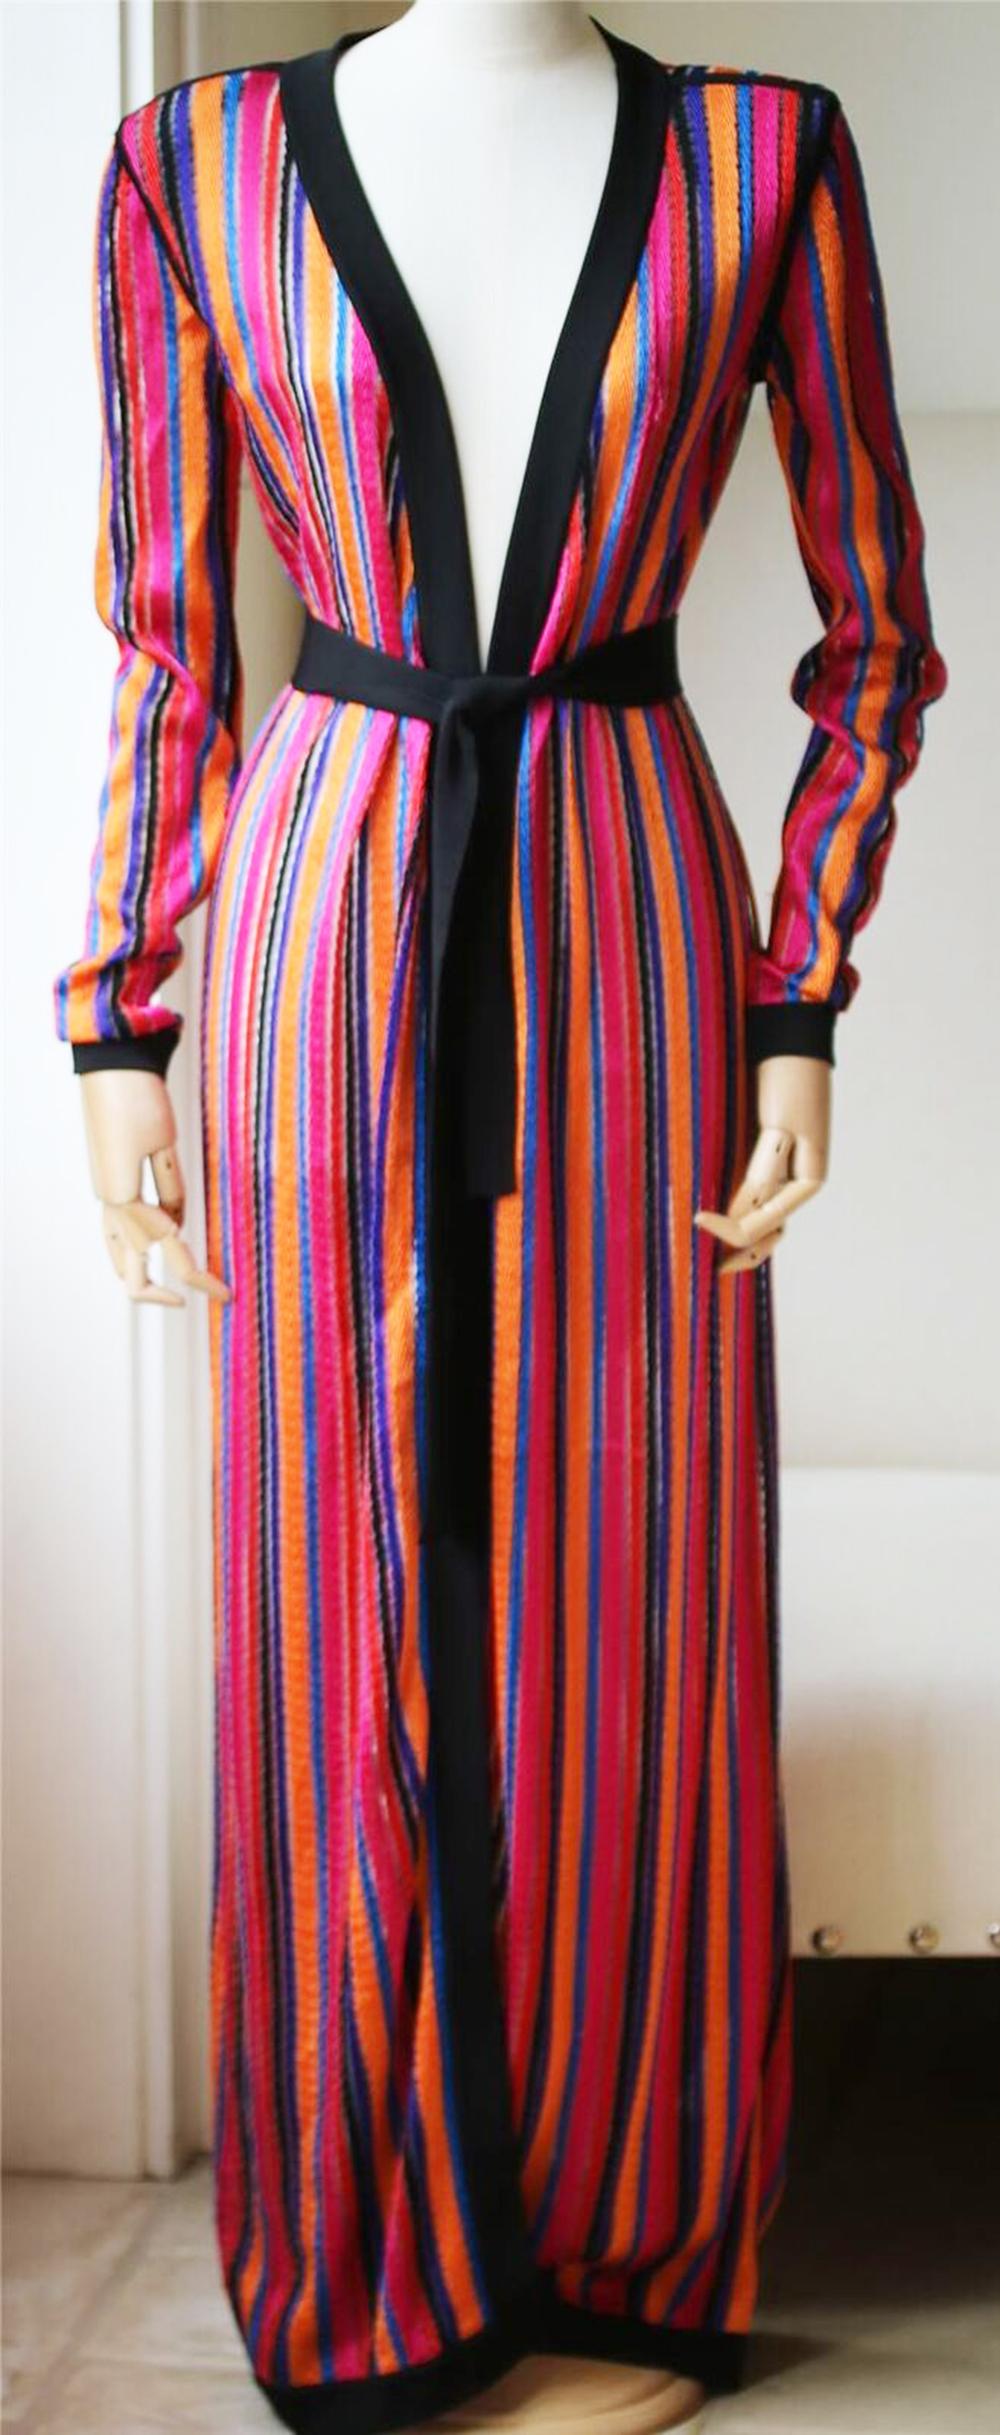 This open-knit design has a floor-length silhouette and is striped in kaleidoscopic hues - Creative Director Olivier Rousteing is inspired by the colors of the sky.
Multicolored open-knit.
Slips on.
94% Viscose, 6% polyamide.
Made in Italy.

Size: